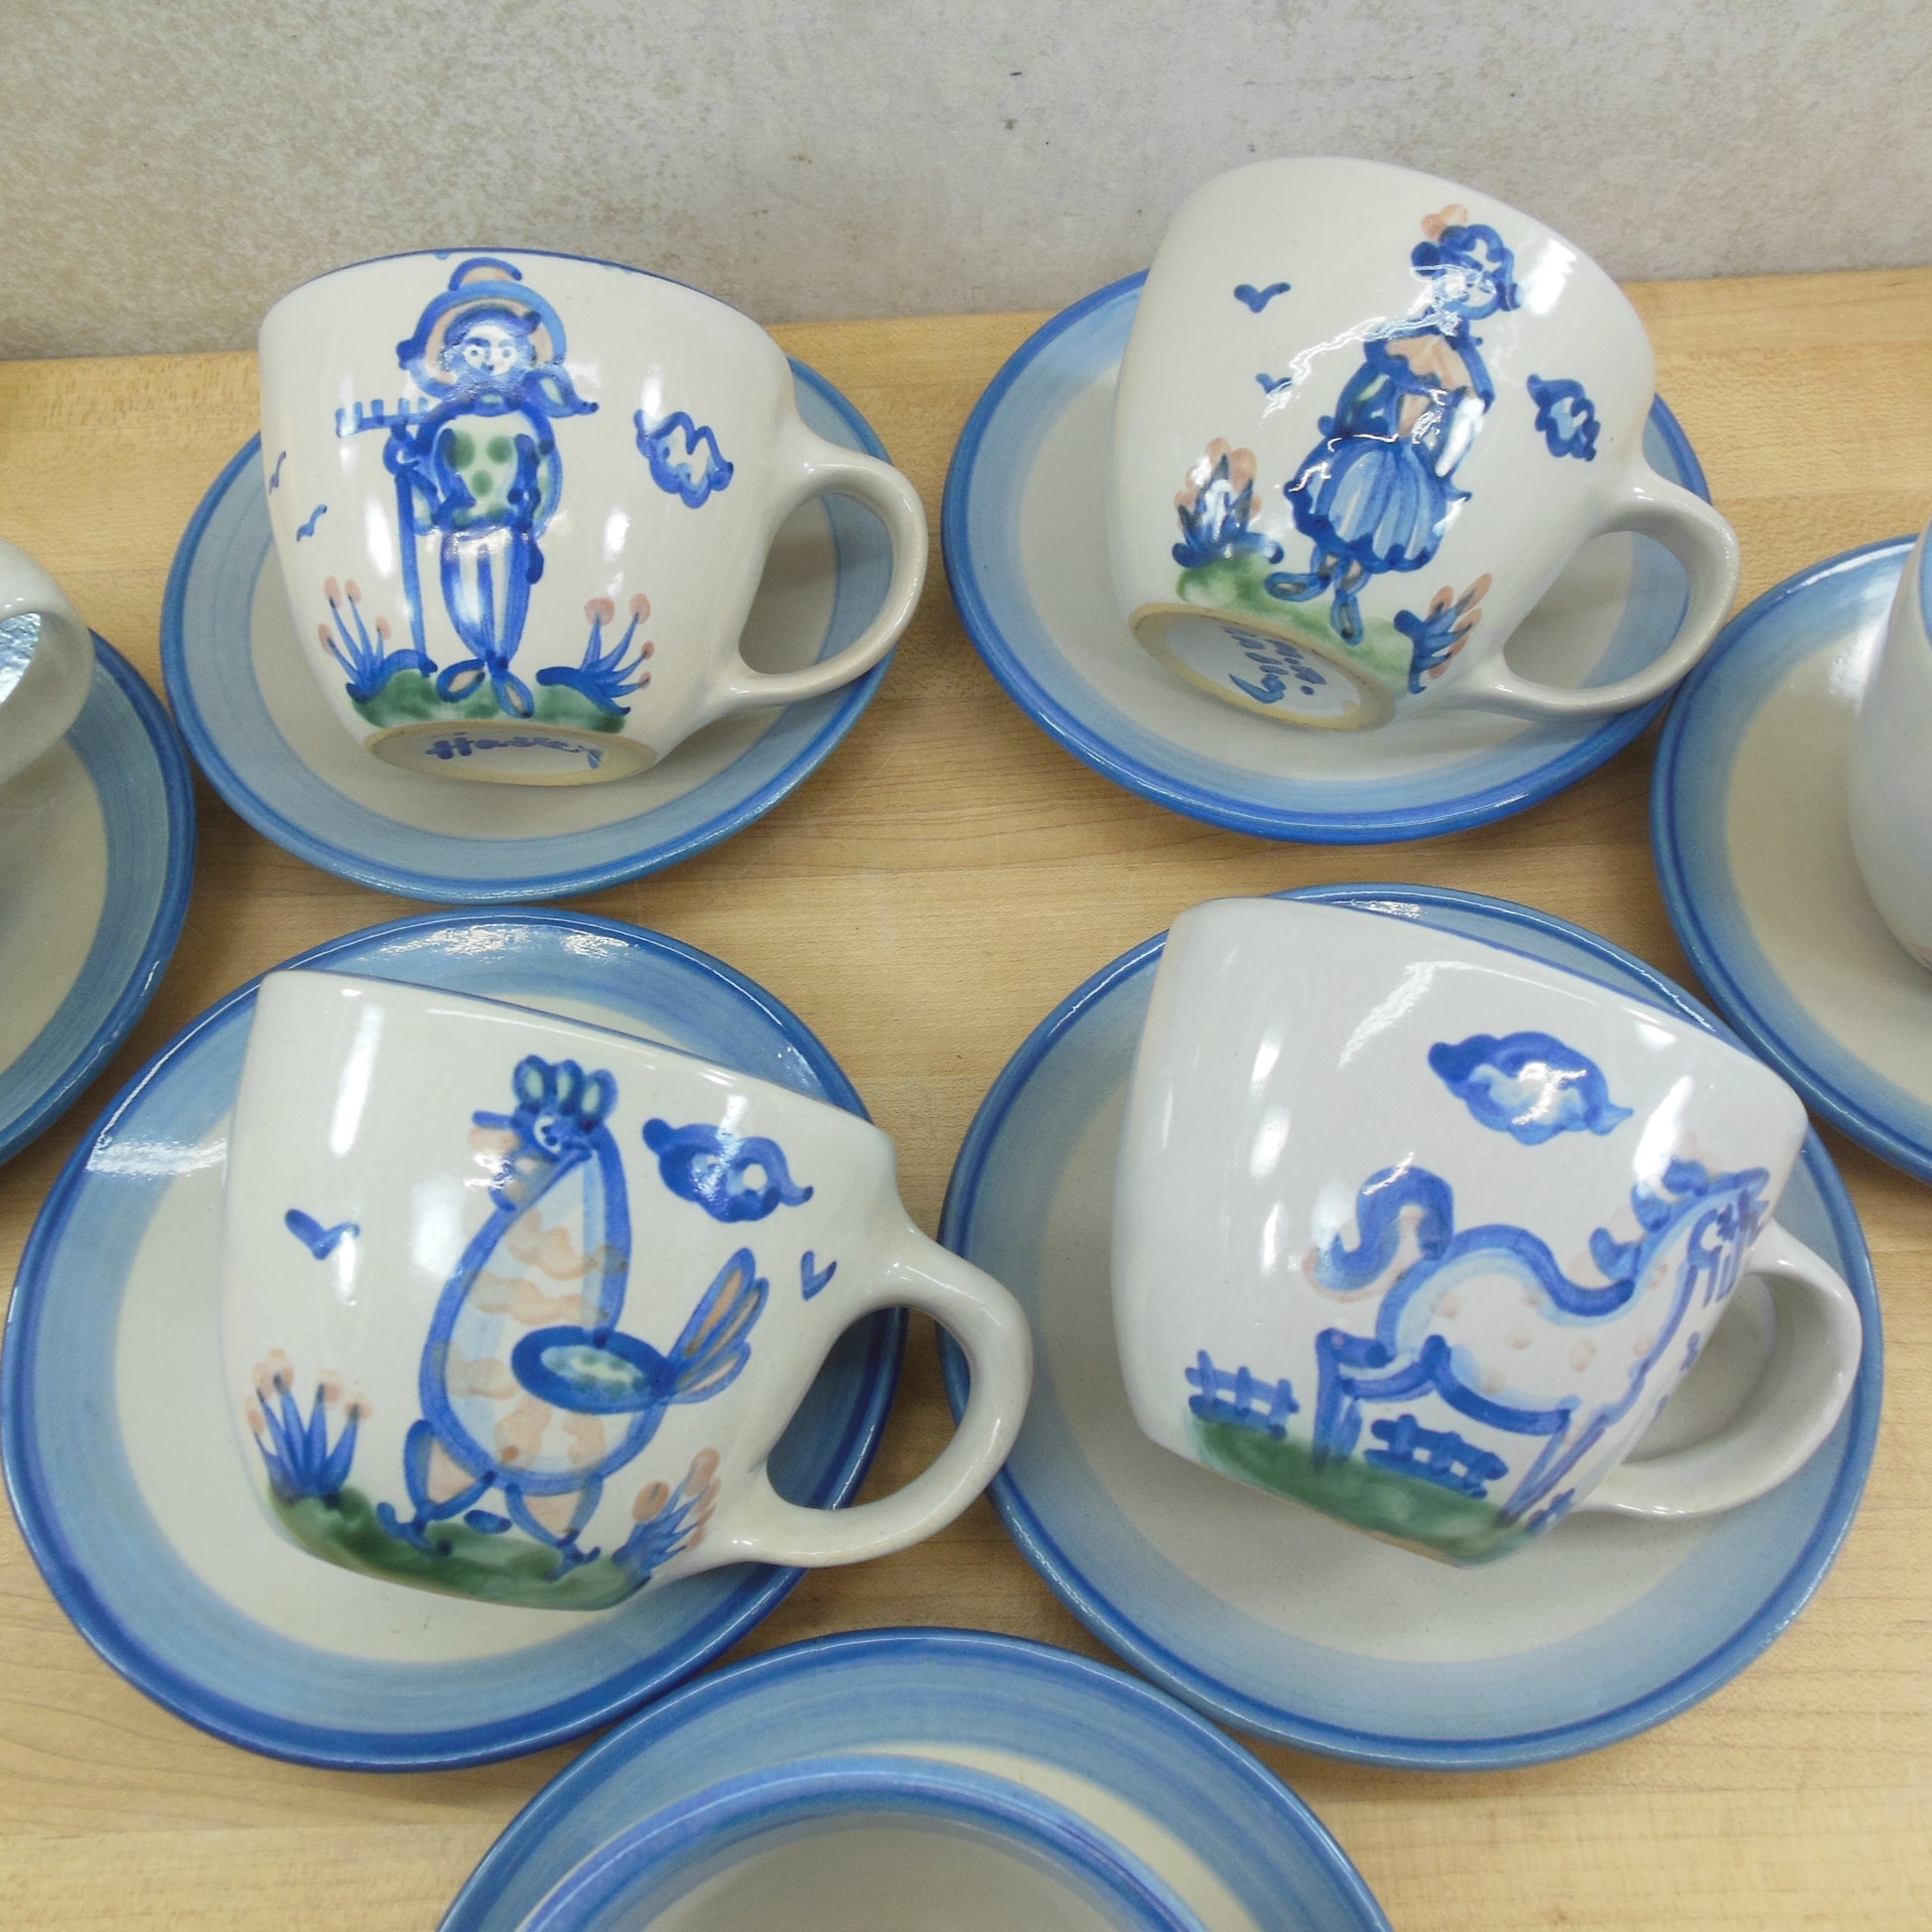 M.A. Hadley Pottery Cup & Saucer Country Farm Animals - 7 Set farmer wife chicken horse